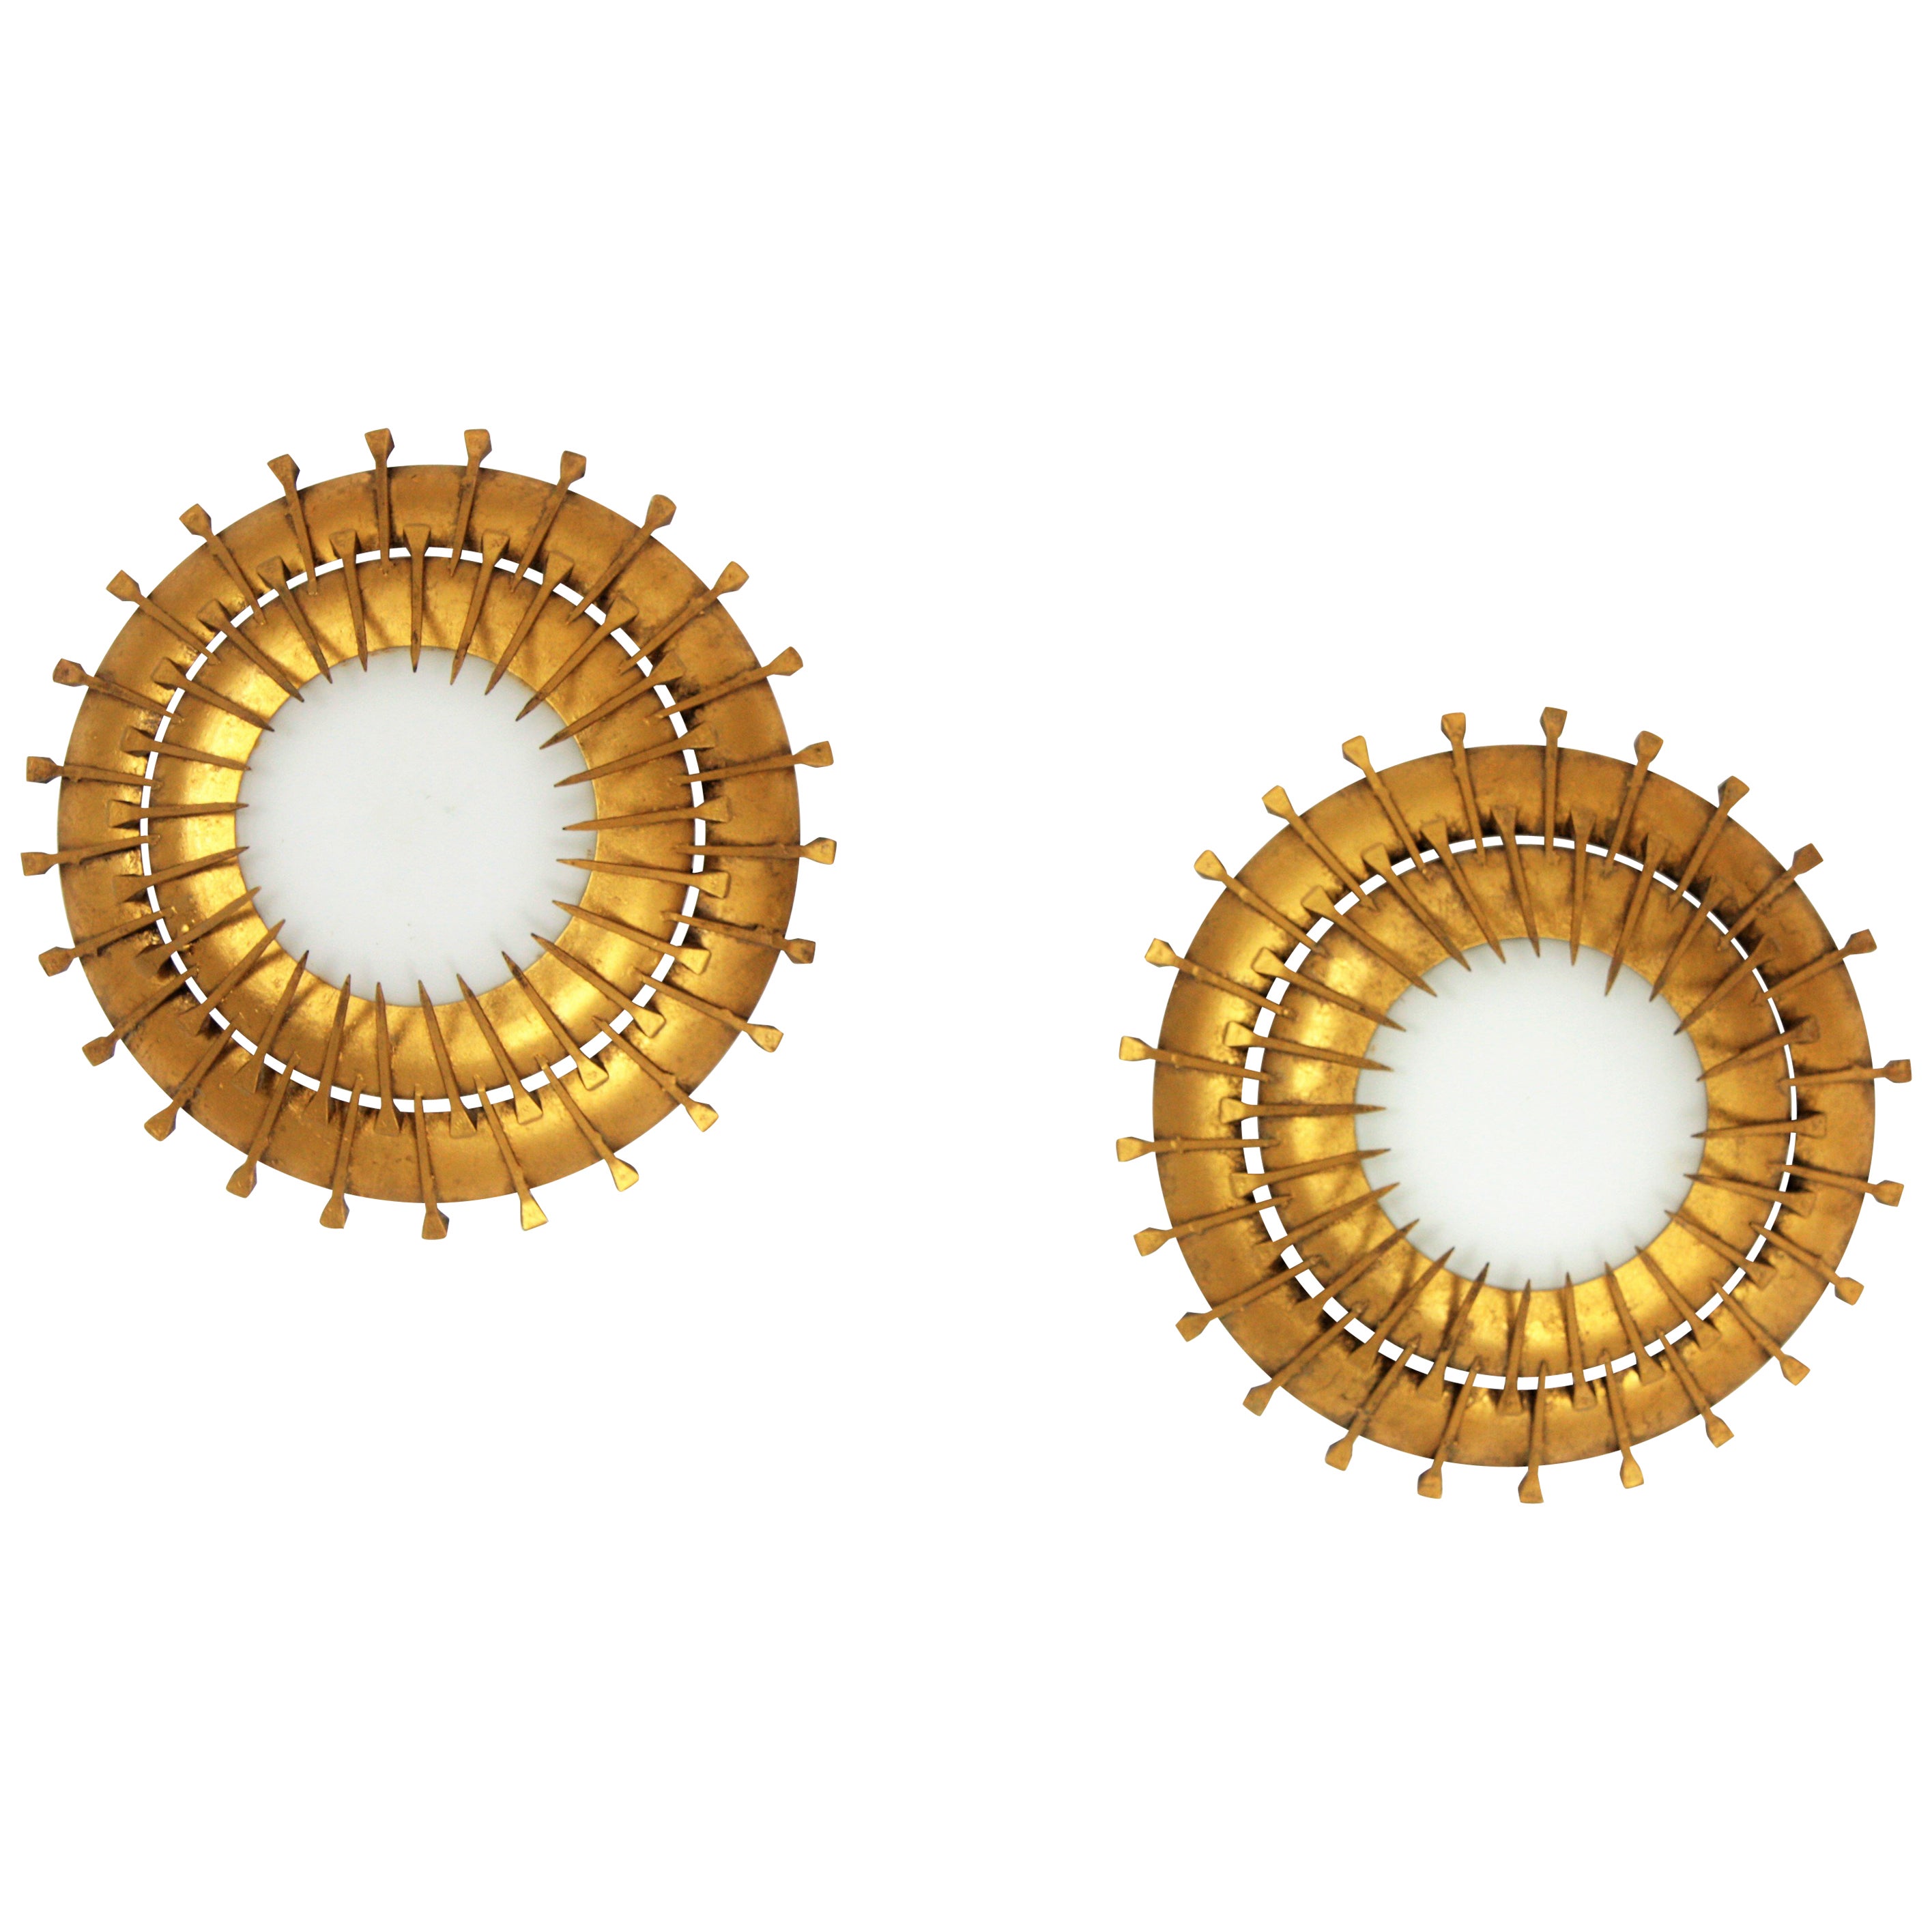 French 1940s-1950s sunburst light fixtures, milk glass, gilt iron
Beautiful pieces placed alone but also interesting mixed with other light fixtures in this manner to create a ceiling constellation or a wall composition. These light fixtures could